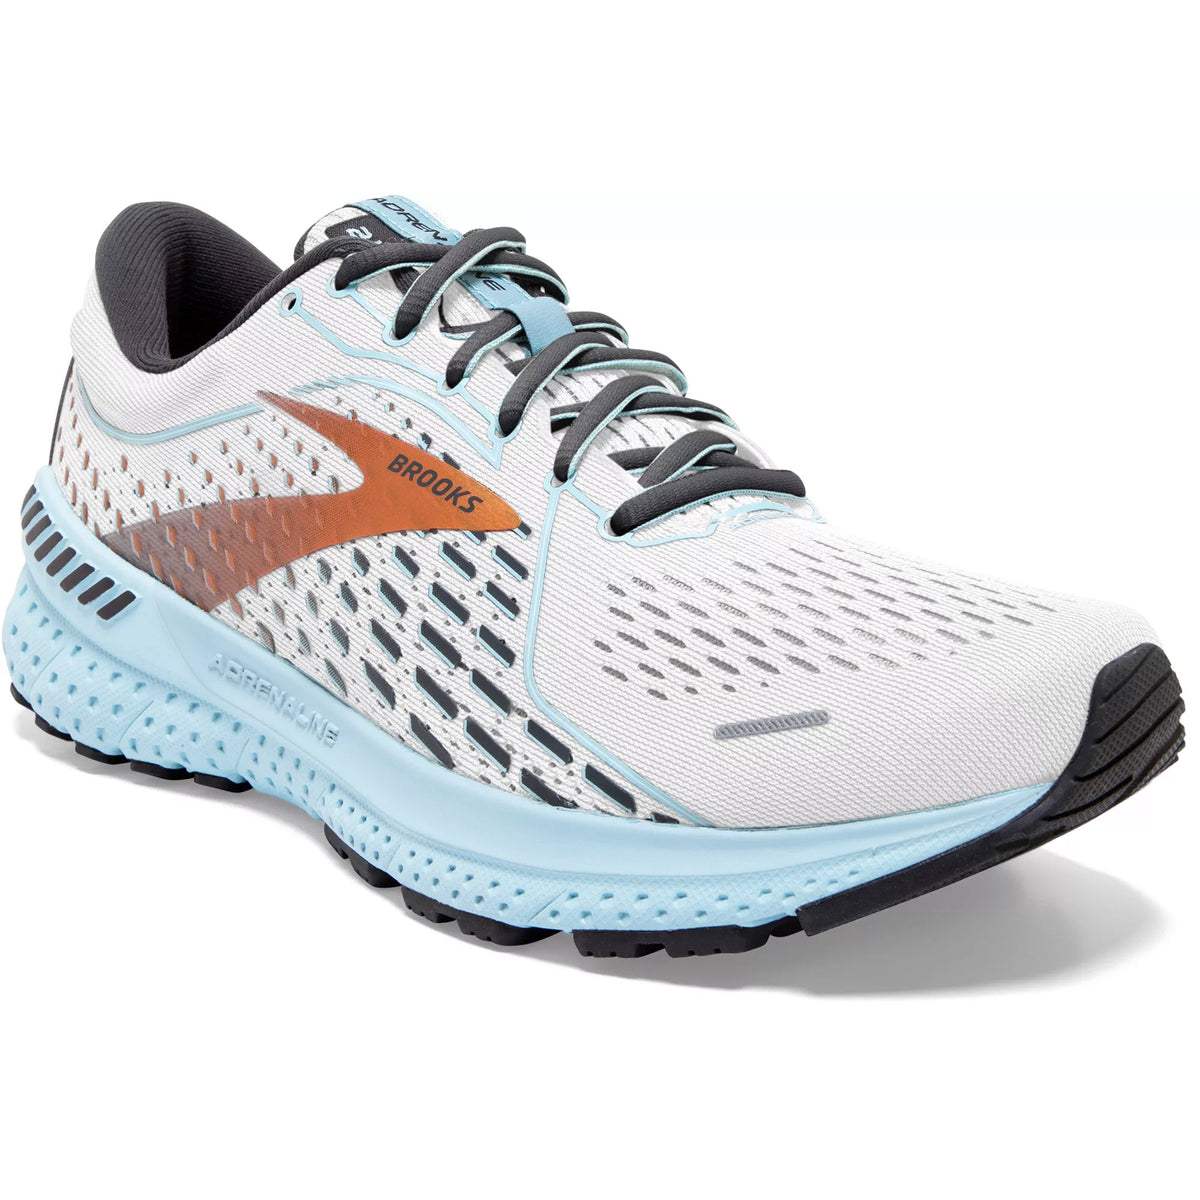 A pair of Brooks Adrenaline GTS 21 White/Light Blue running shoes with a cushioned sole design and GuideRails Holistic Support System for enhanced stability.